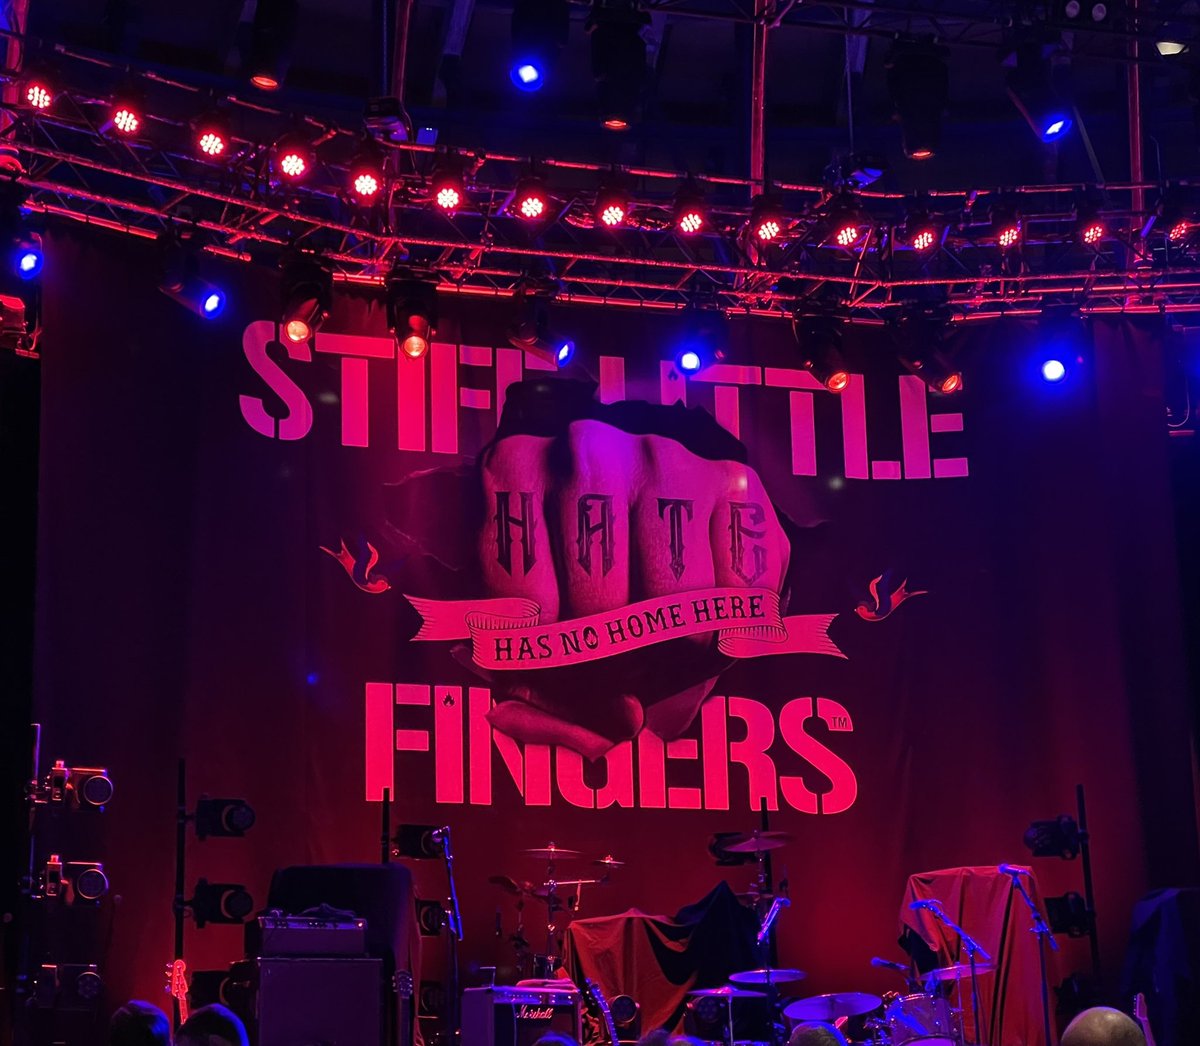 Oh my goodness…. Jake Burns and Stiff Little Fingers slayed it tonight at the Roundhouse. A privilege to be there! #Hatehasnohomehere #slf